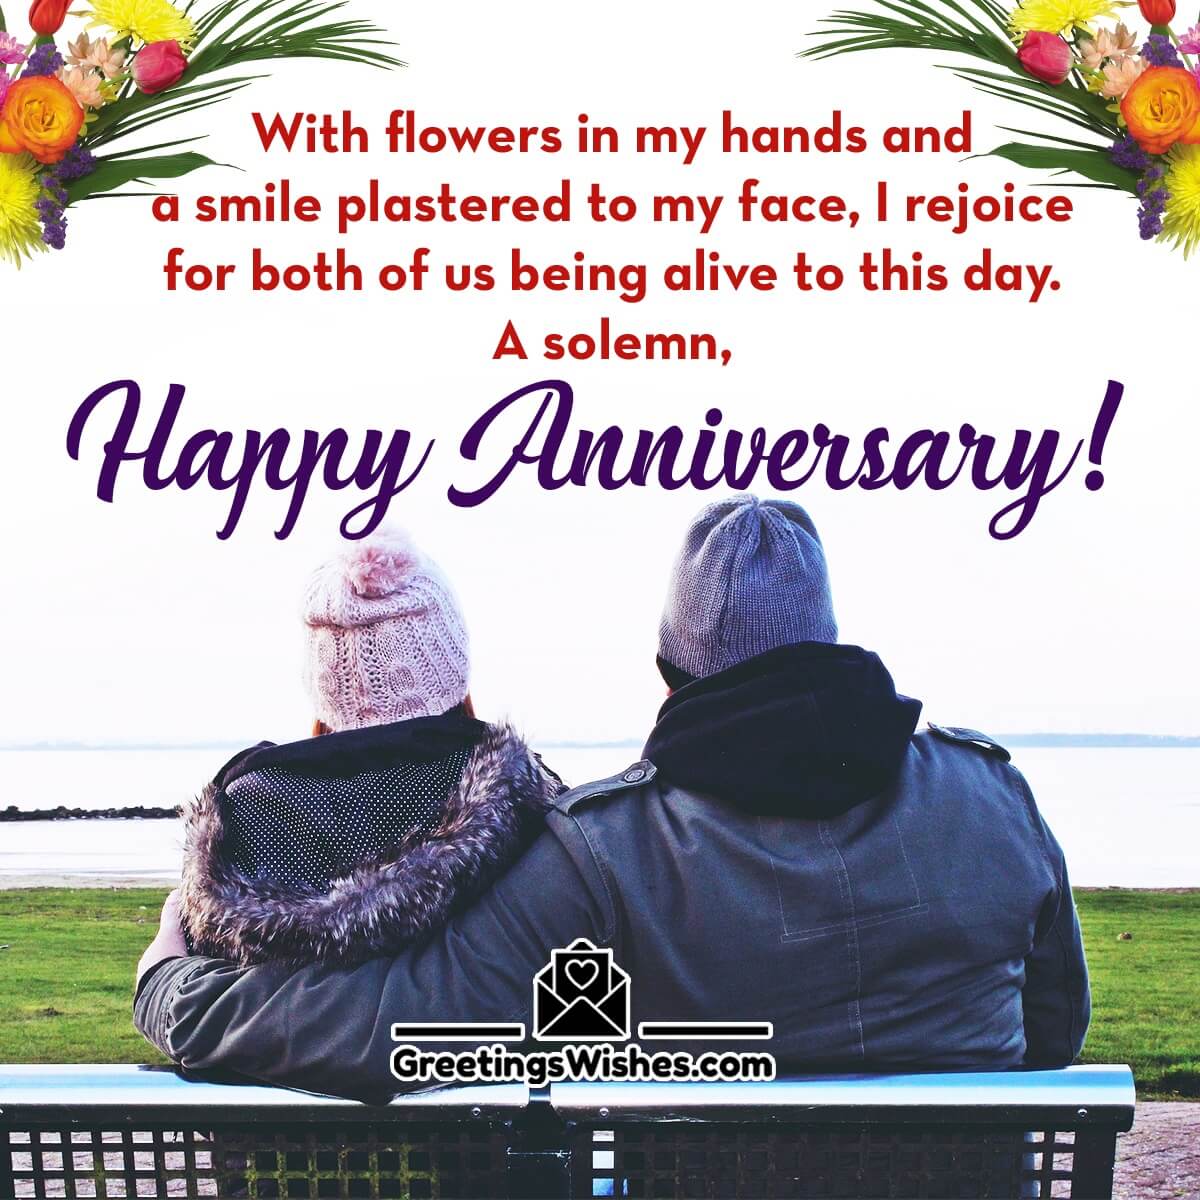 Funny Anniversary Wishes - Greetings Wishes